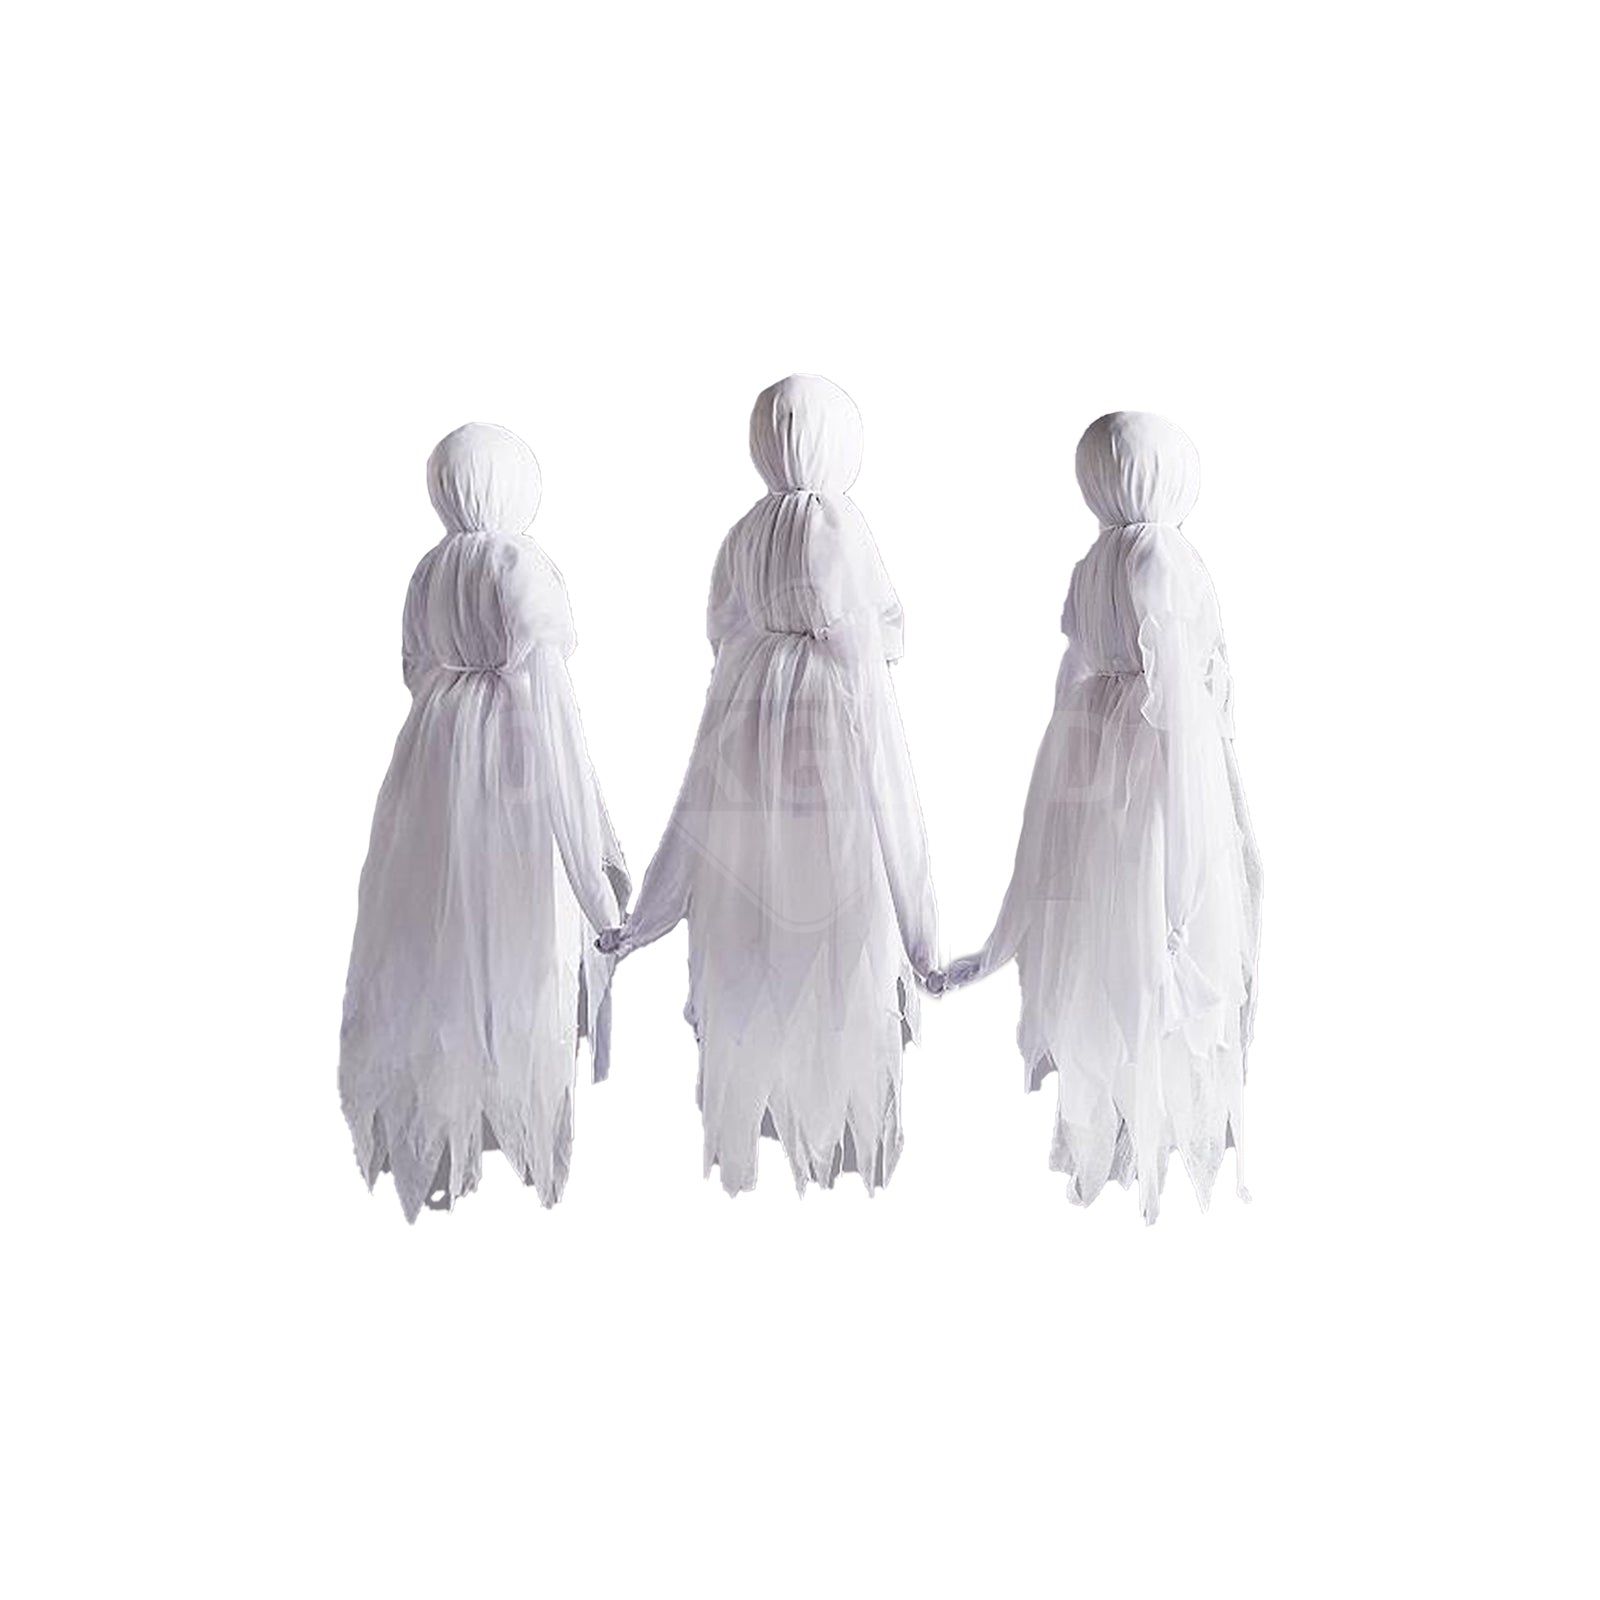 Holding Hands Ghosts For Halloween Decoration